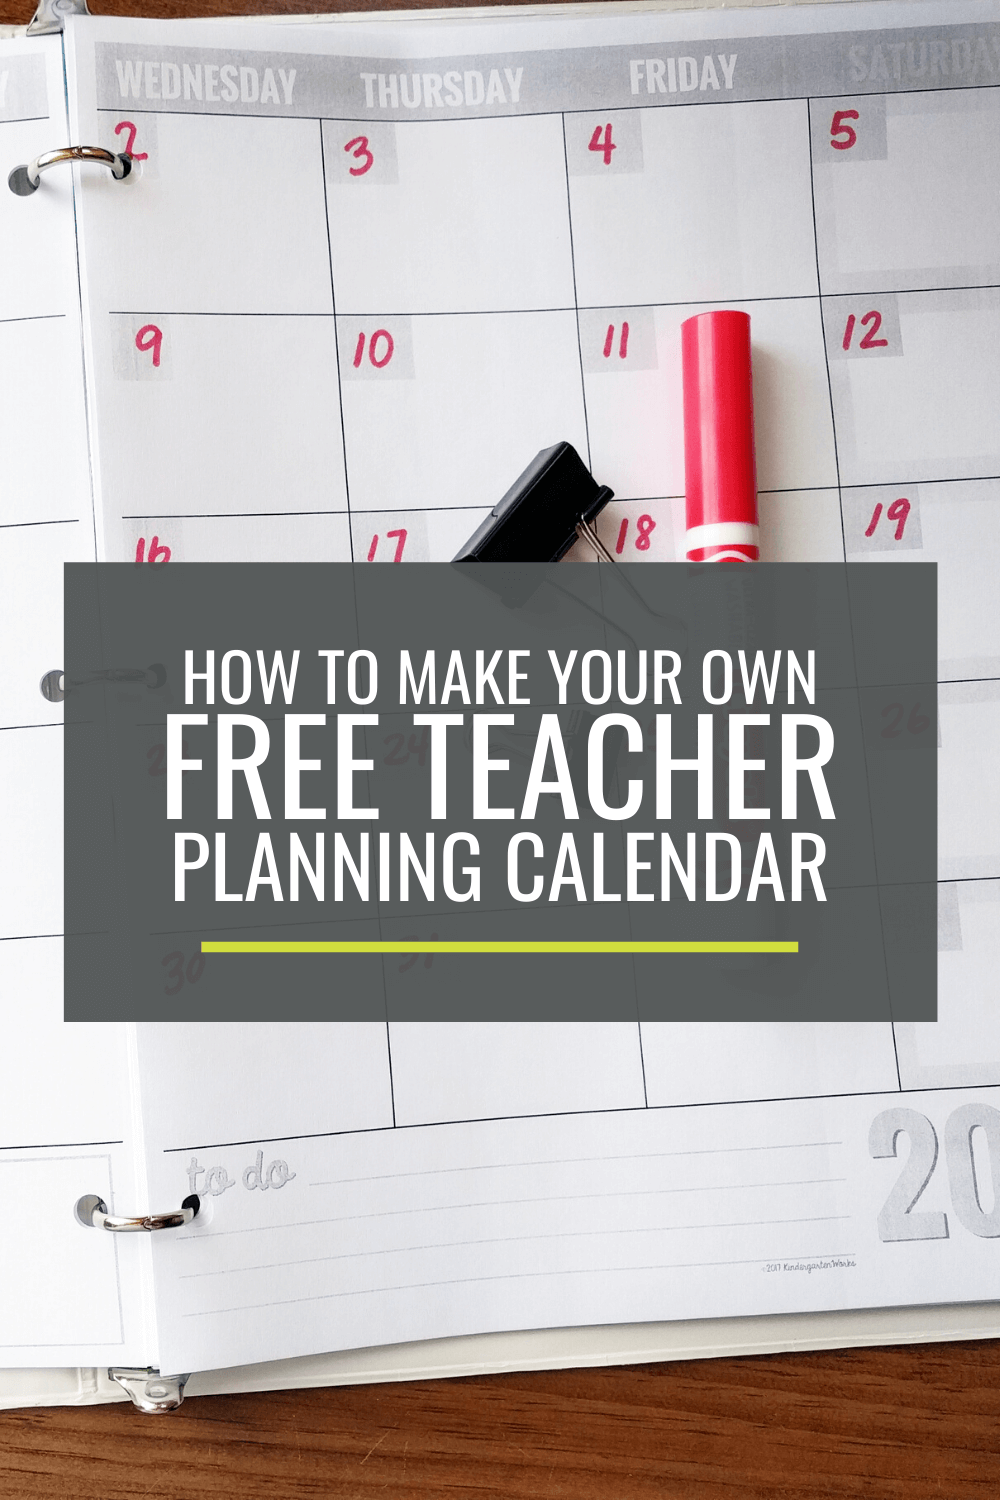 How to Make Your Own Free Teacher Planning Calendar